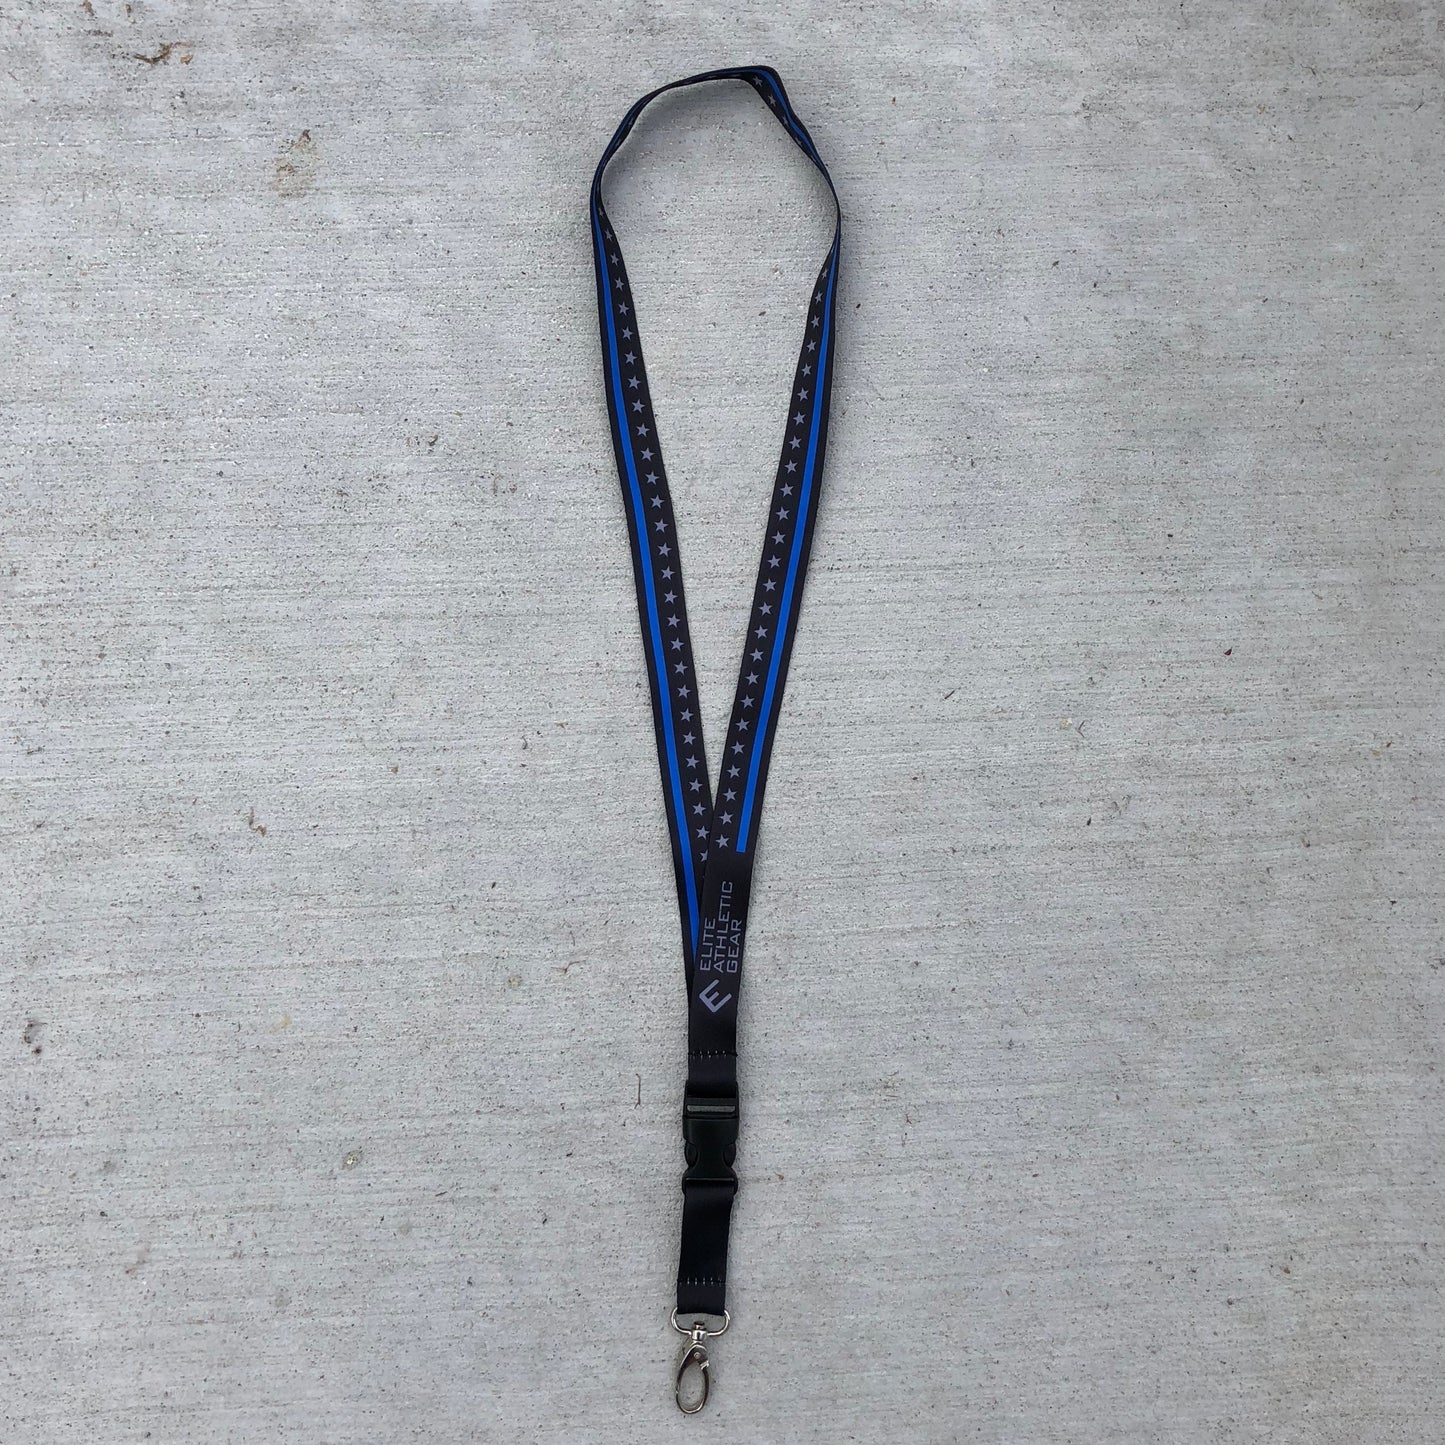 Thin Blue Line Lanyard - Southern Grace Creations